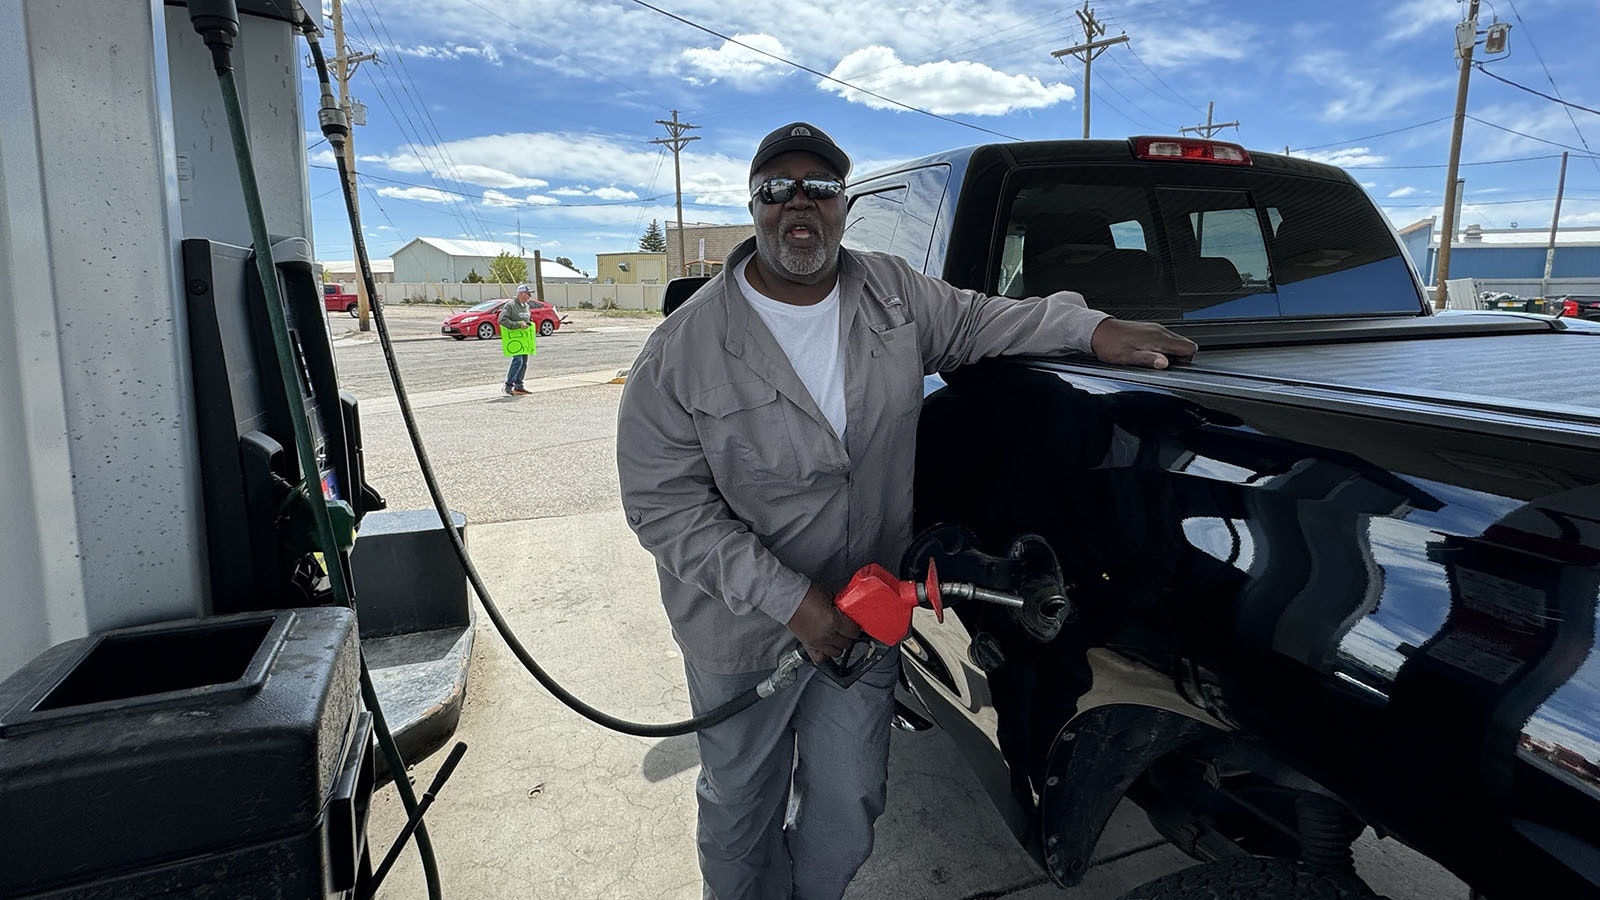 Retired Cheyenne resident Amos Williams said he tries to steer clear of political discussions but thinks beyond just gasoline, the country may have been set back “20 years as far as racism” because of Trump’s policies. Still, he said, “I feel bad because a lot of people just can’t make a living these days. I don’t buy into who is a fault for things, but something needs to be done to bring inflation down.”